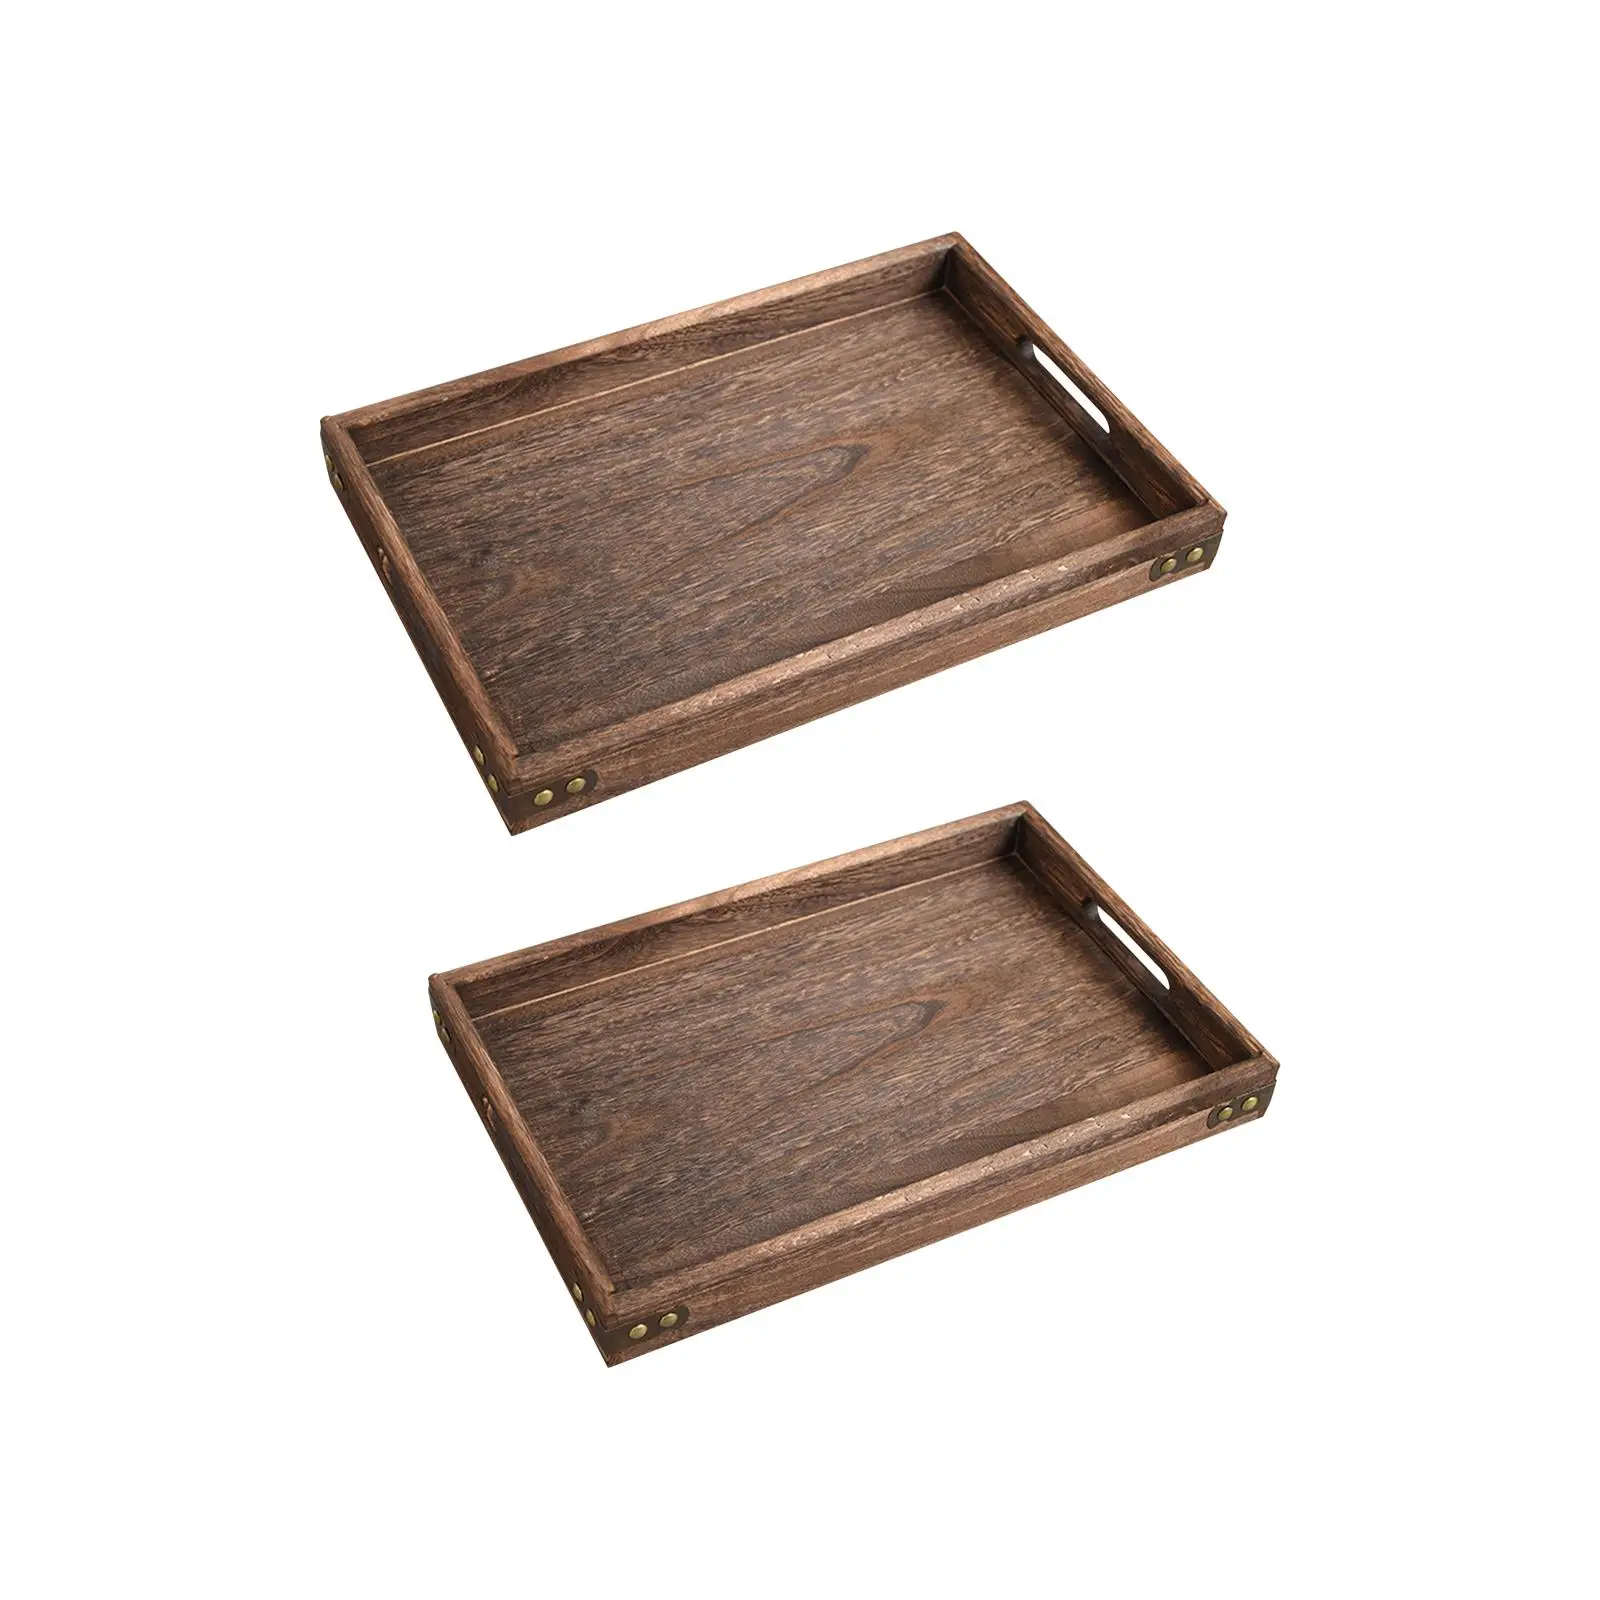 Rustic Wood Serving Tray Platter Eating Tray for Homes, Hotels, Bars Serving Pastries, Snacks, Coffee, Tea Multipurpose Sturdy